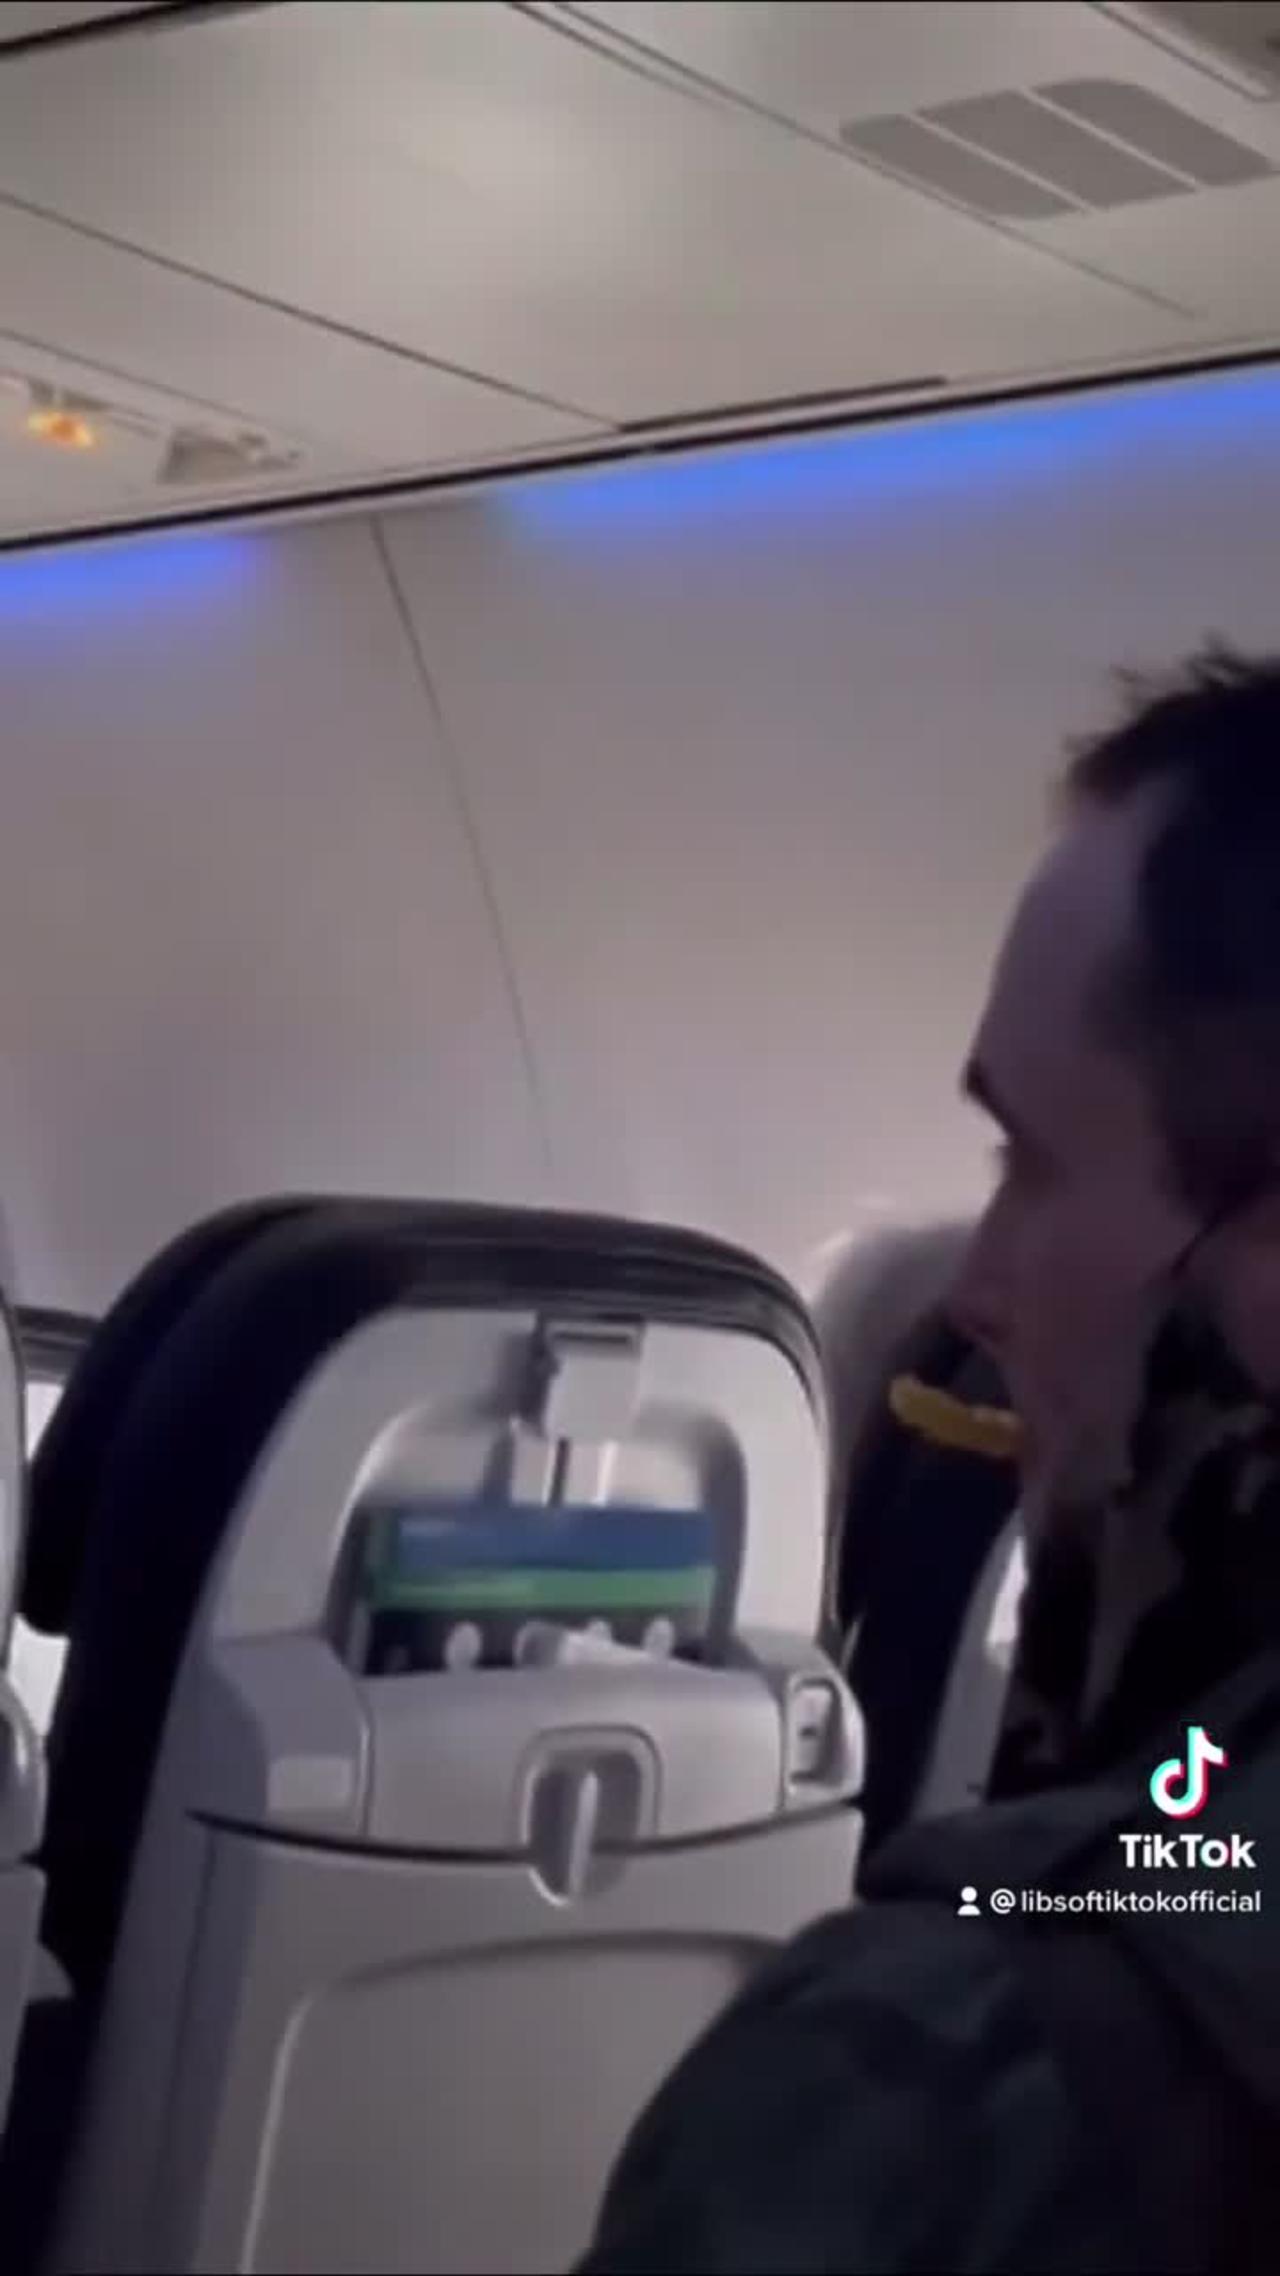 Man keeps a fry in his mouth for an entire flight to bypass the "can only remove mask to eat" rule